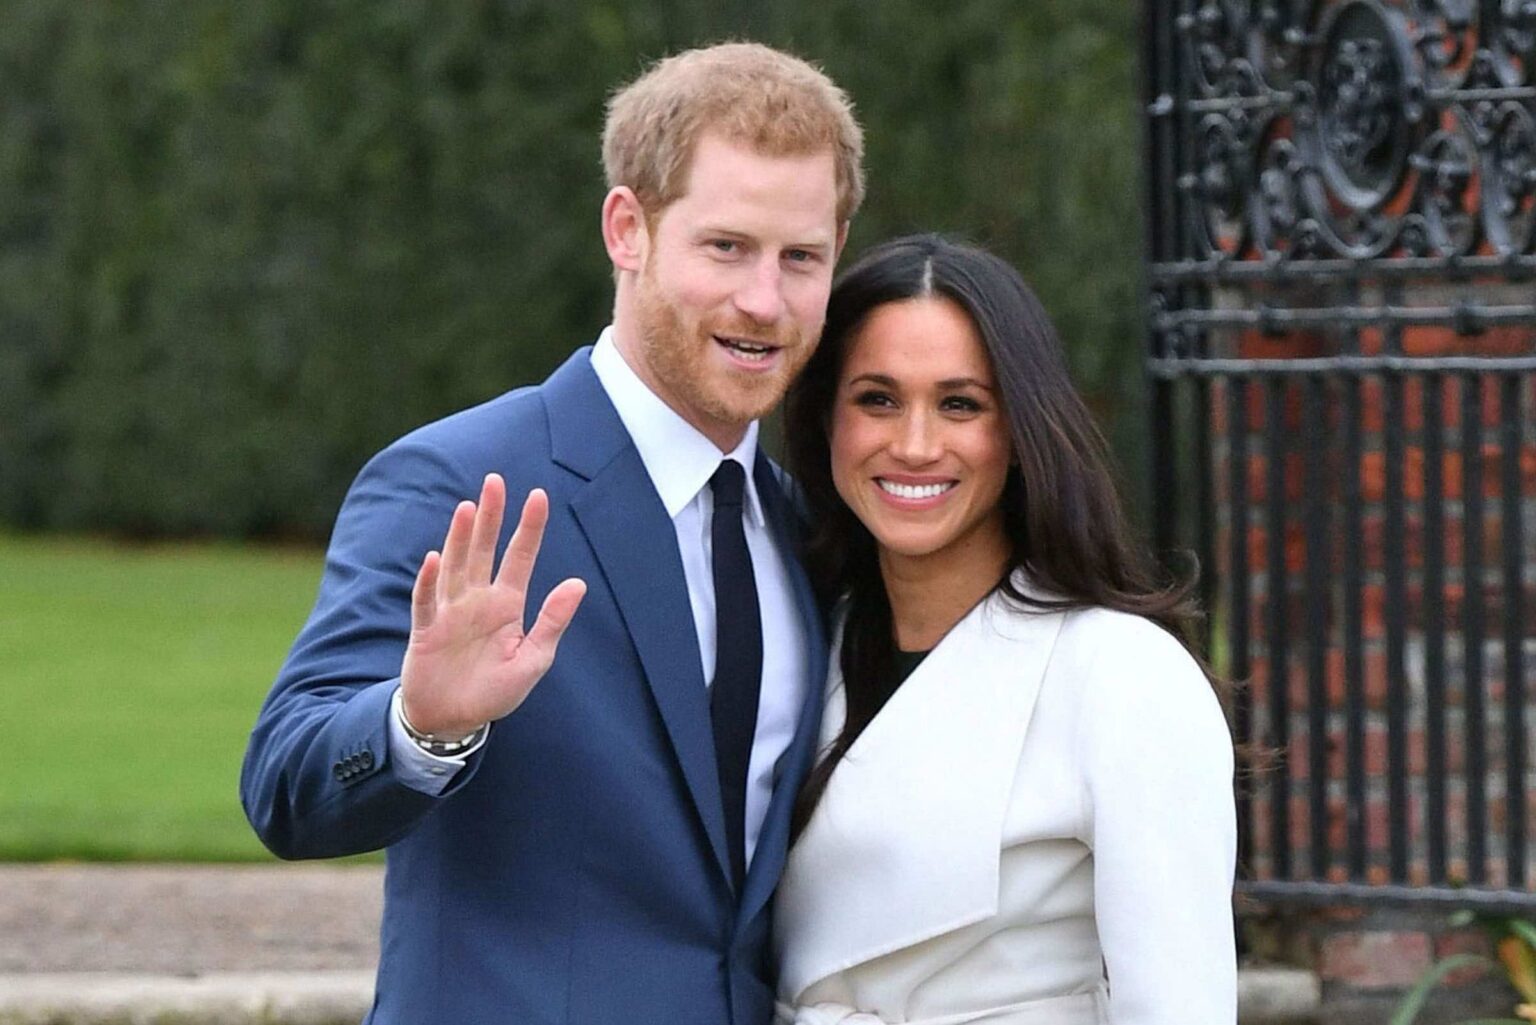 After the royal split, no one was sure when Prince Harry and Meghan Markle would reunite with the fam. Here's what we know about their return to the UK.